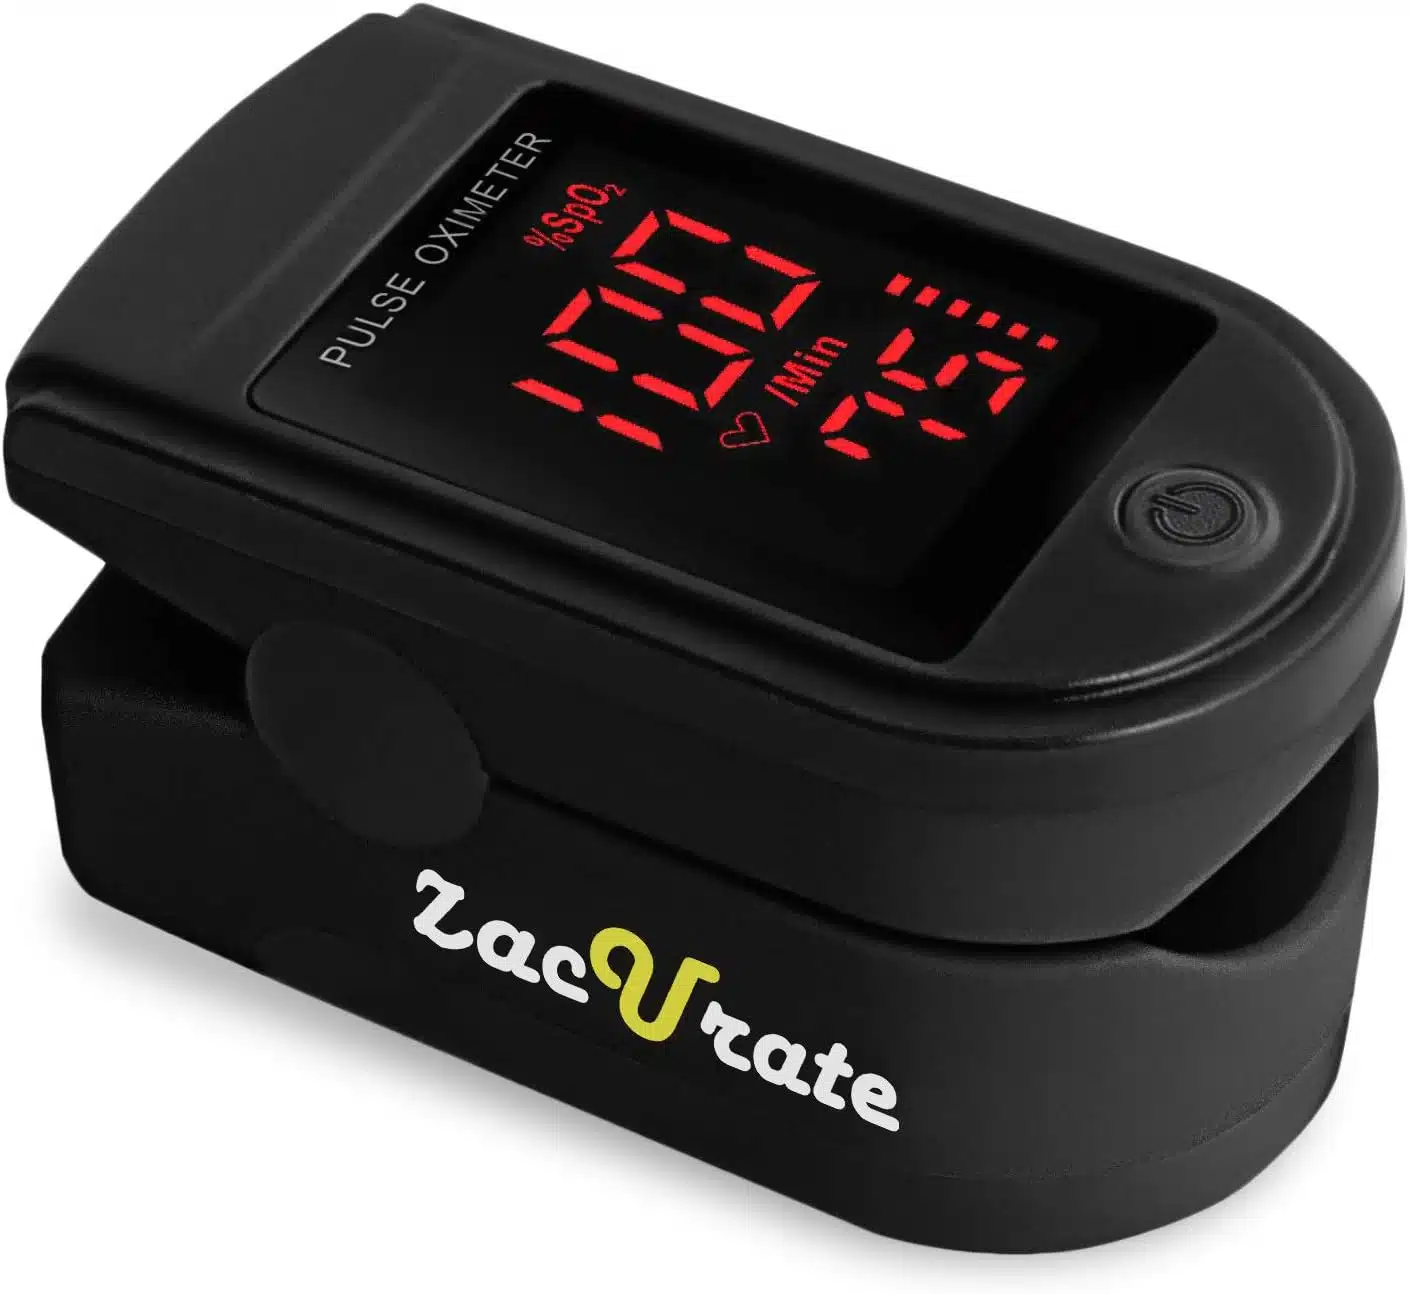 Welness Care Zacurate Pro Series 500DL Fingertip Pulse Oximeter Review